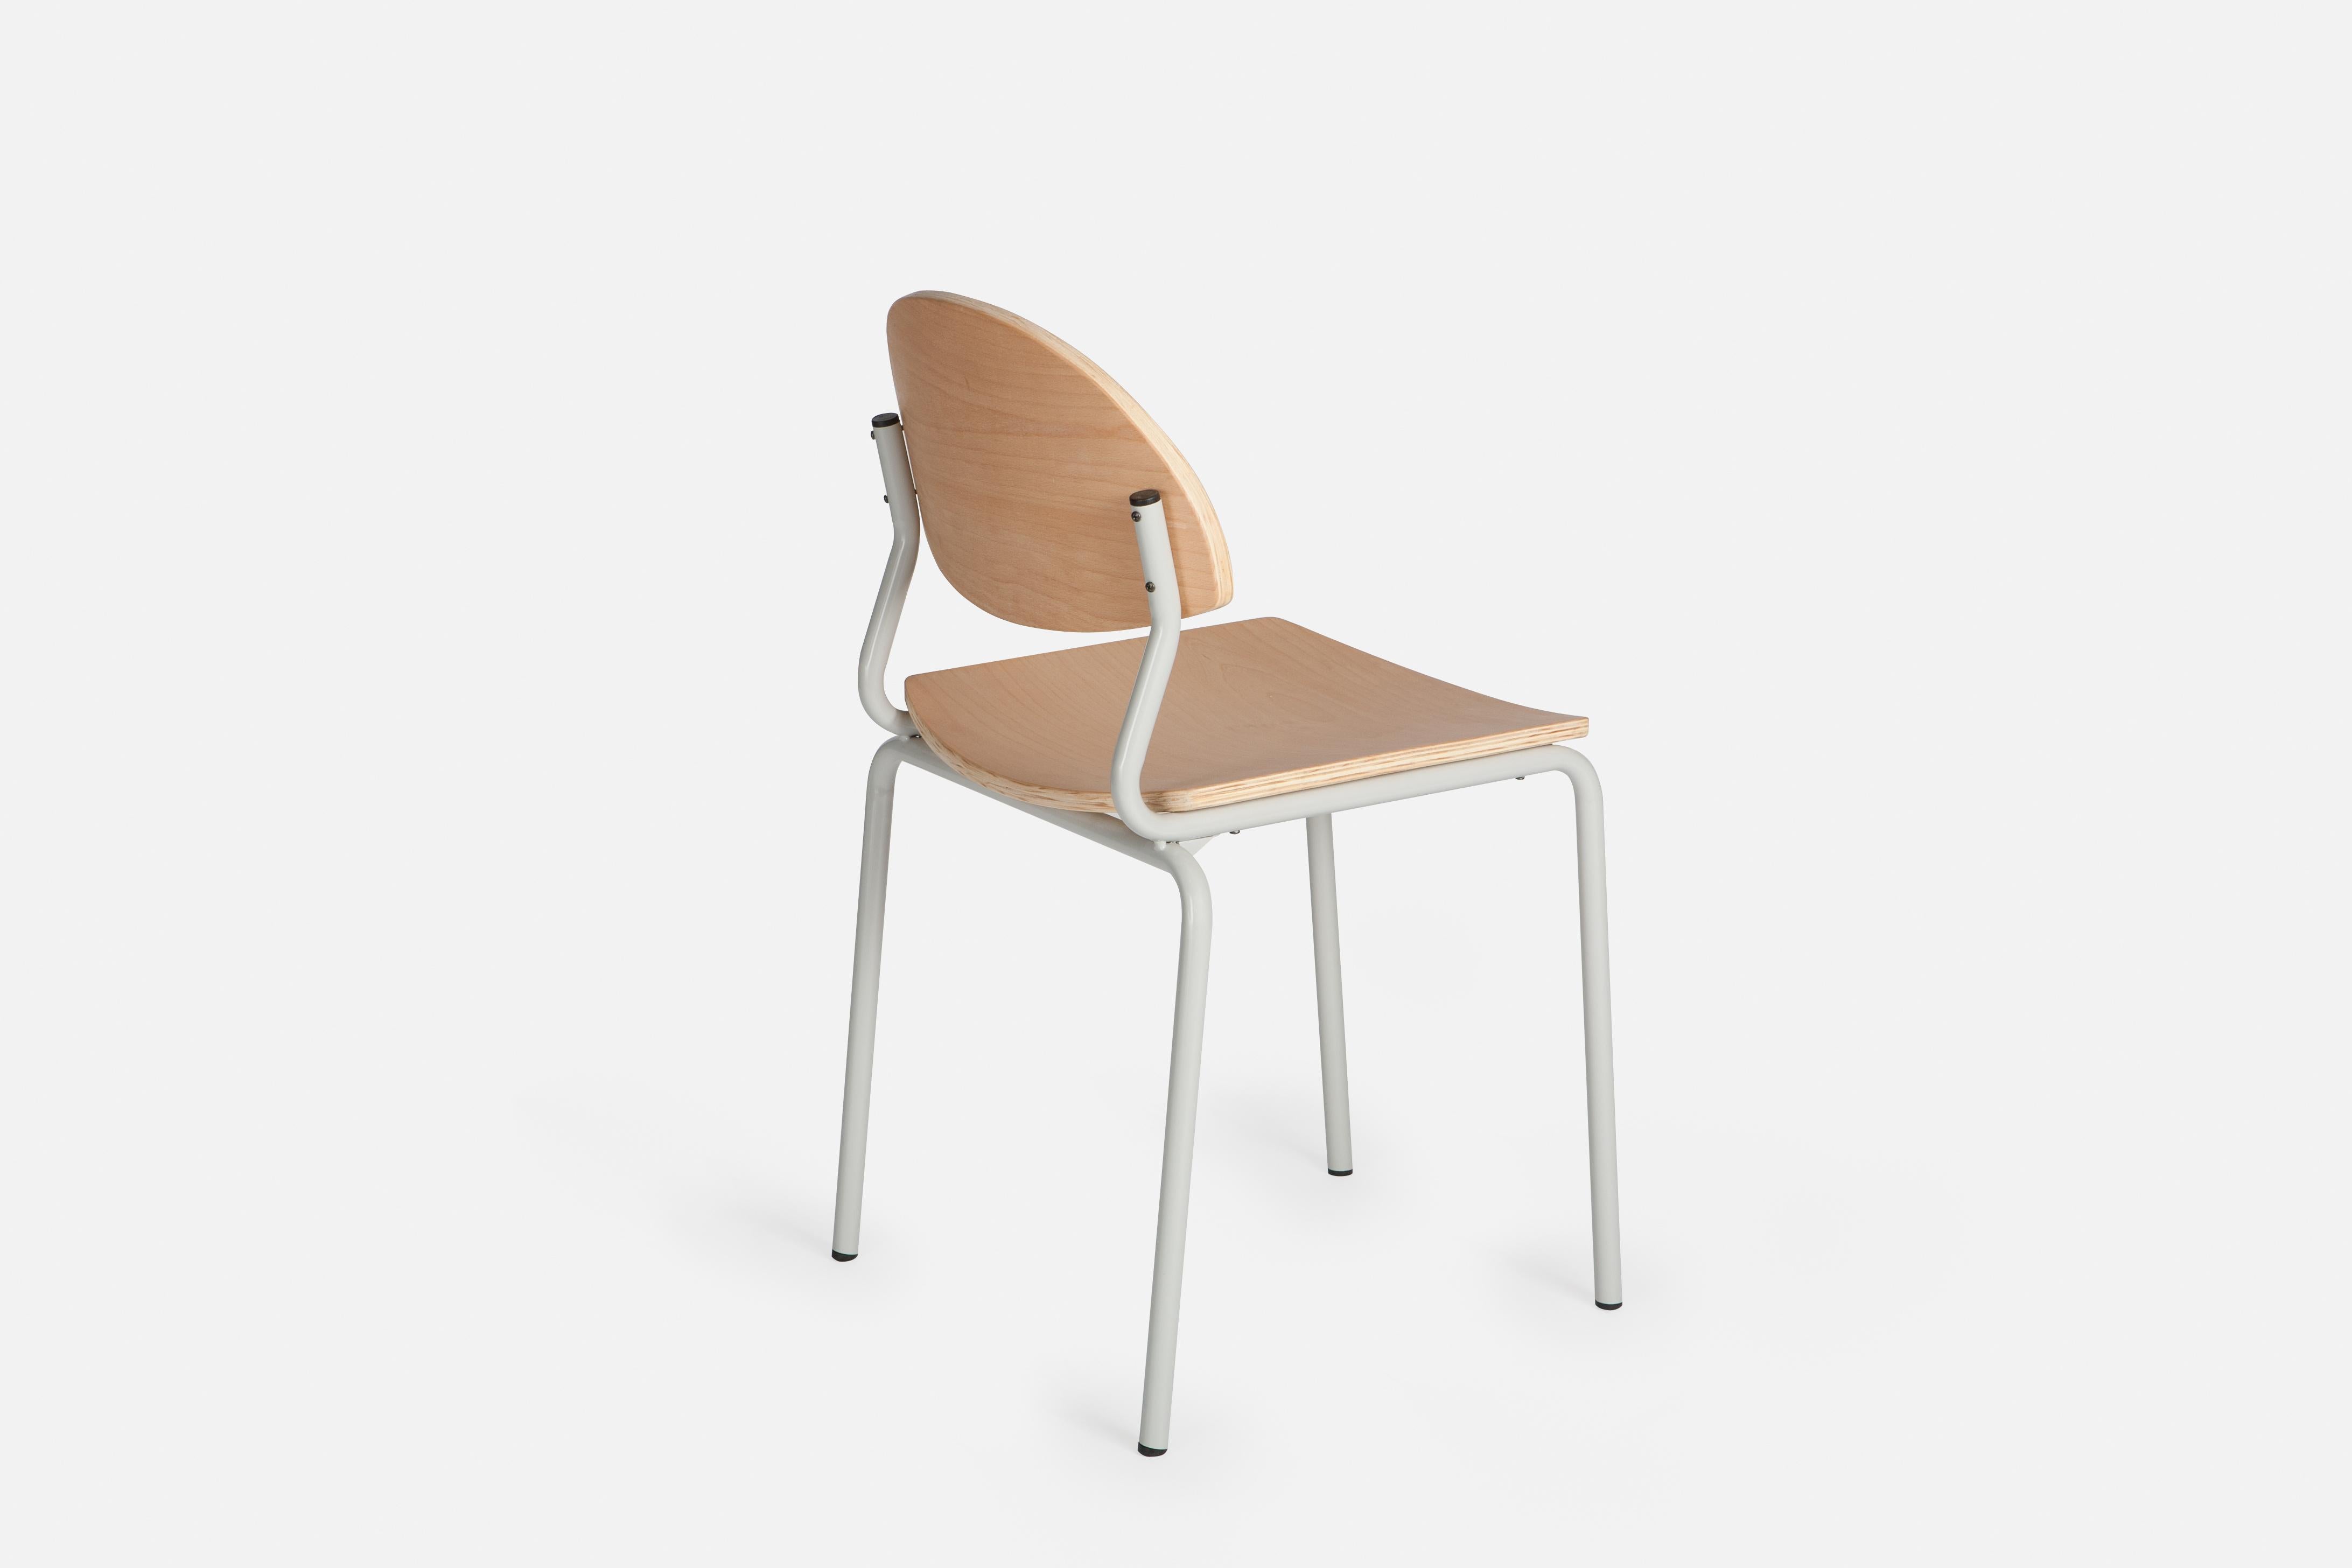 Chips chairs are made from a powder coated steel tube frame, and molded plywood shells with a beech veneer. Chips come in a range of standard frame colors and timber finishes. Custom colored frames can be produced on request.

Designed and